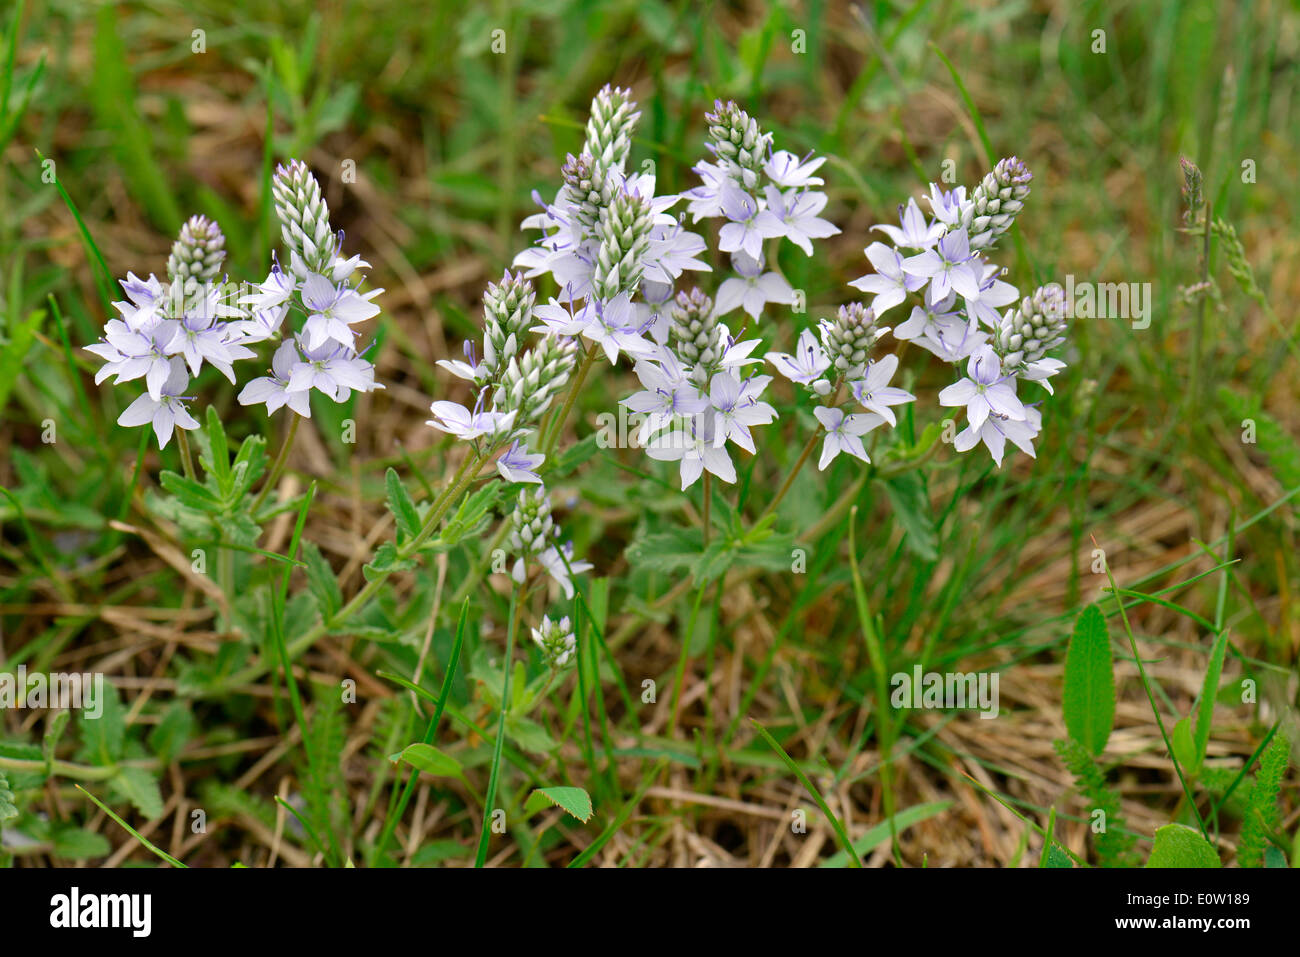 Prostrate Speedwell, Sprawling Speedwell (Veronica prostrata), flowering plants. Germany Stock Photo